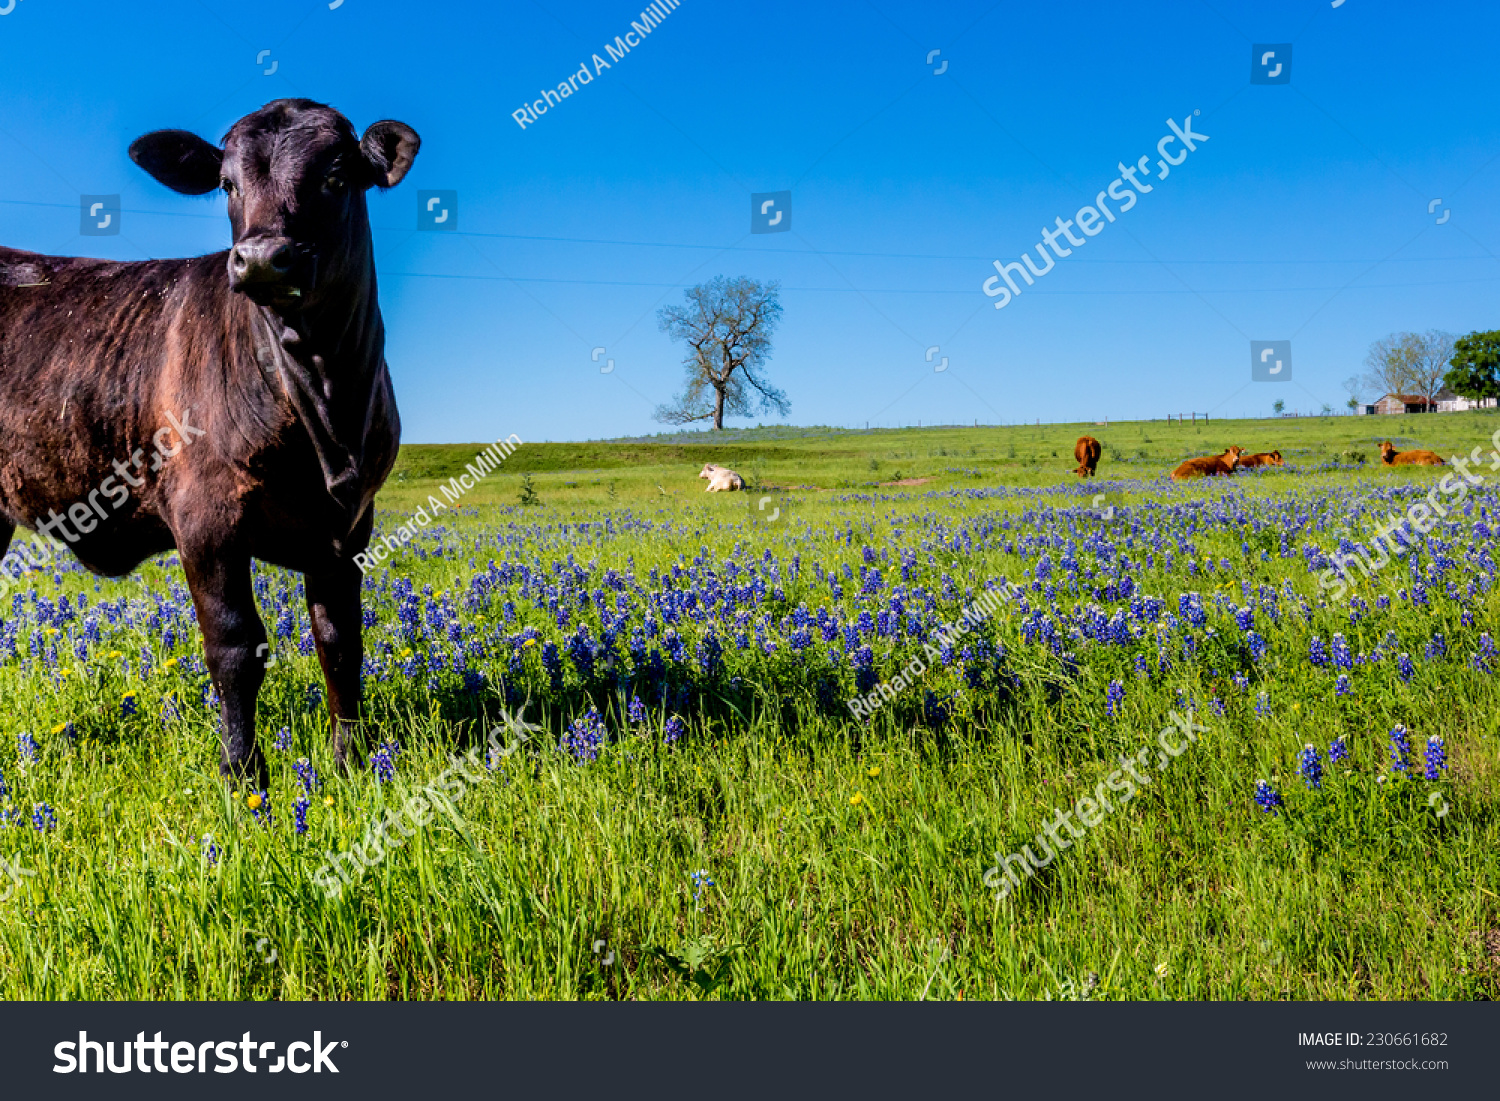 Texas Black Angus Cow Field Famous Stock Photo 230661682  Shutterstock